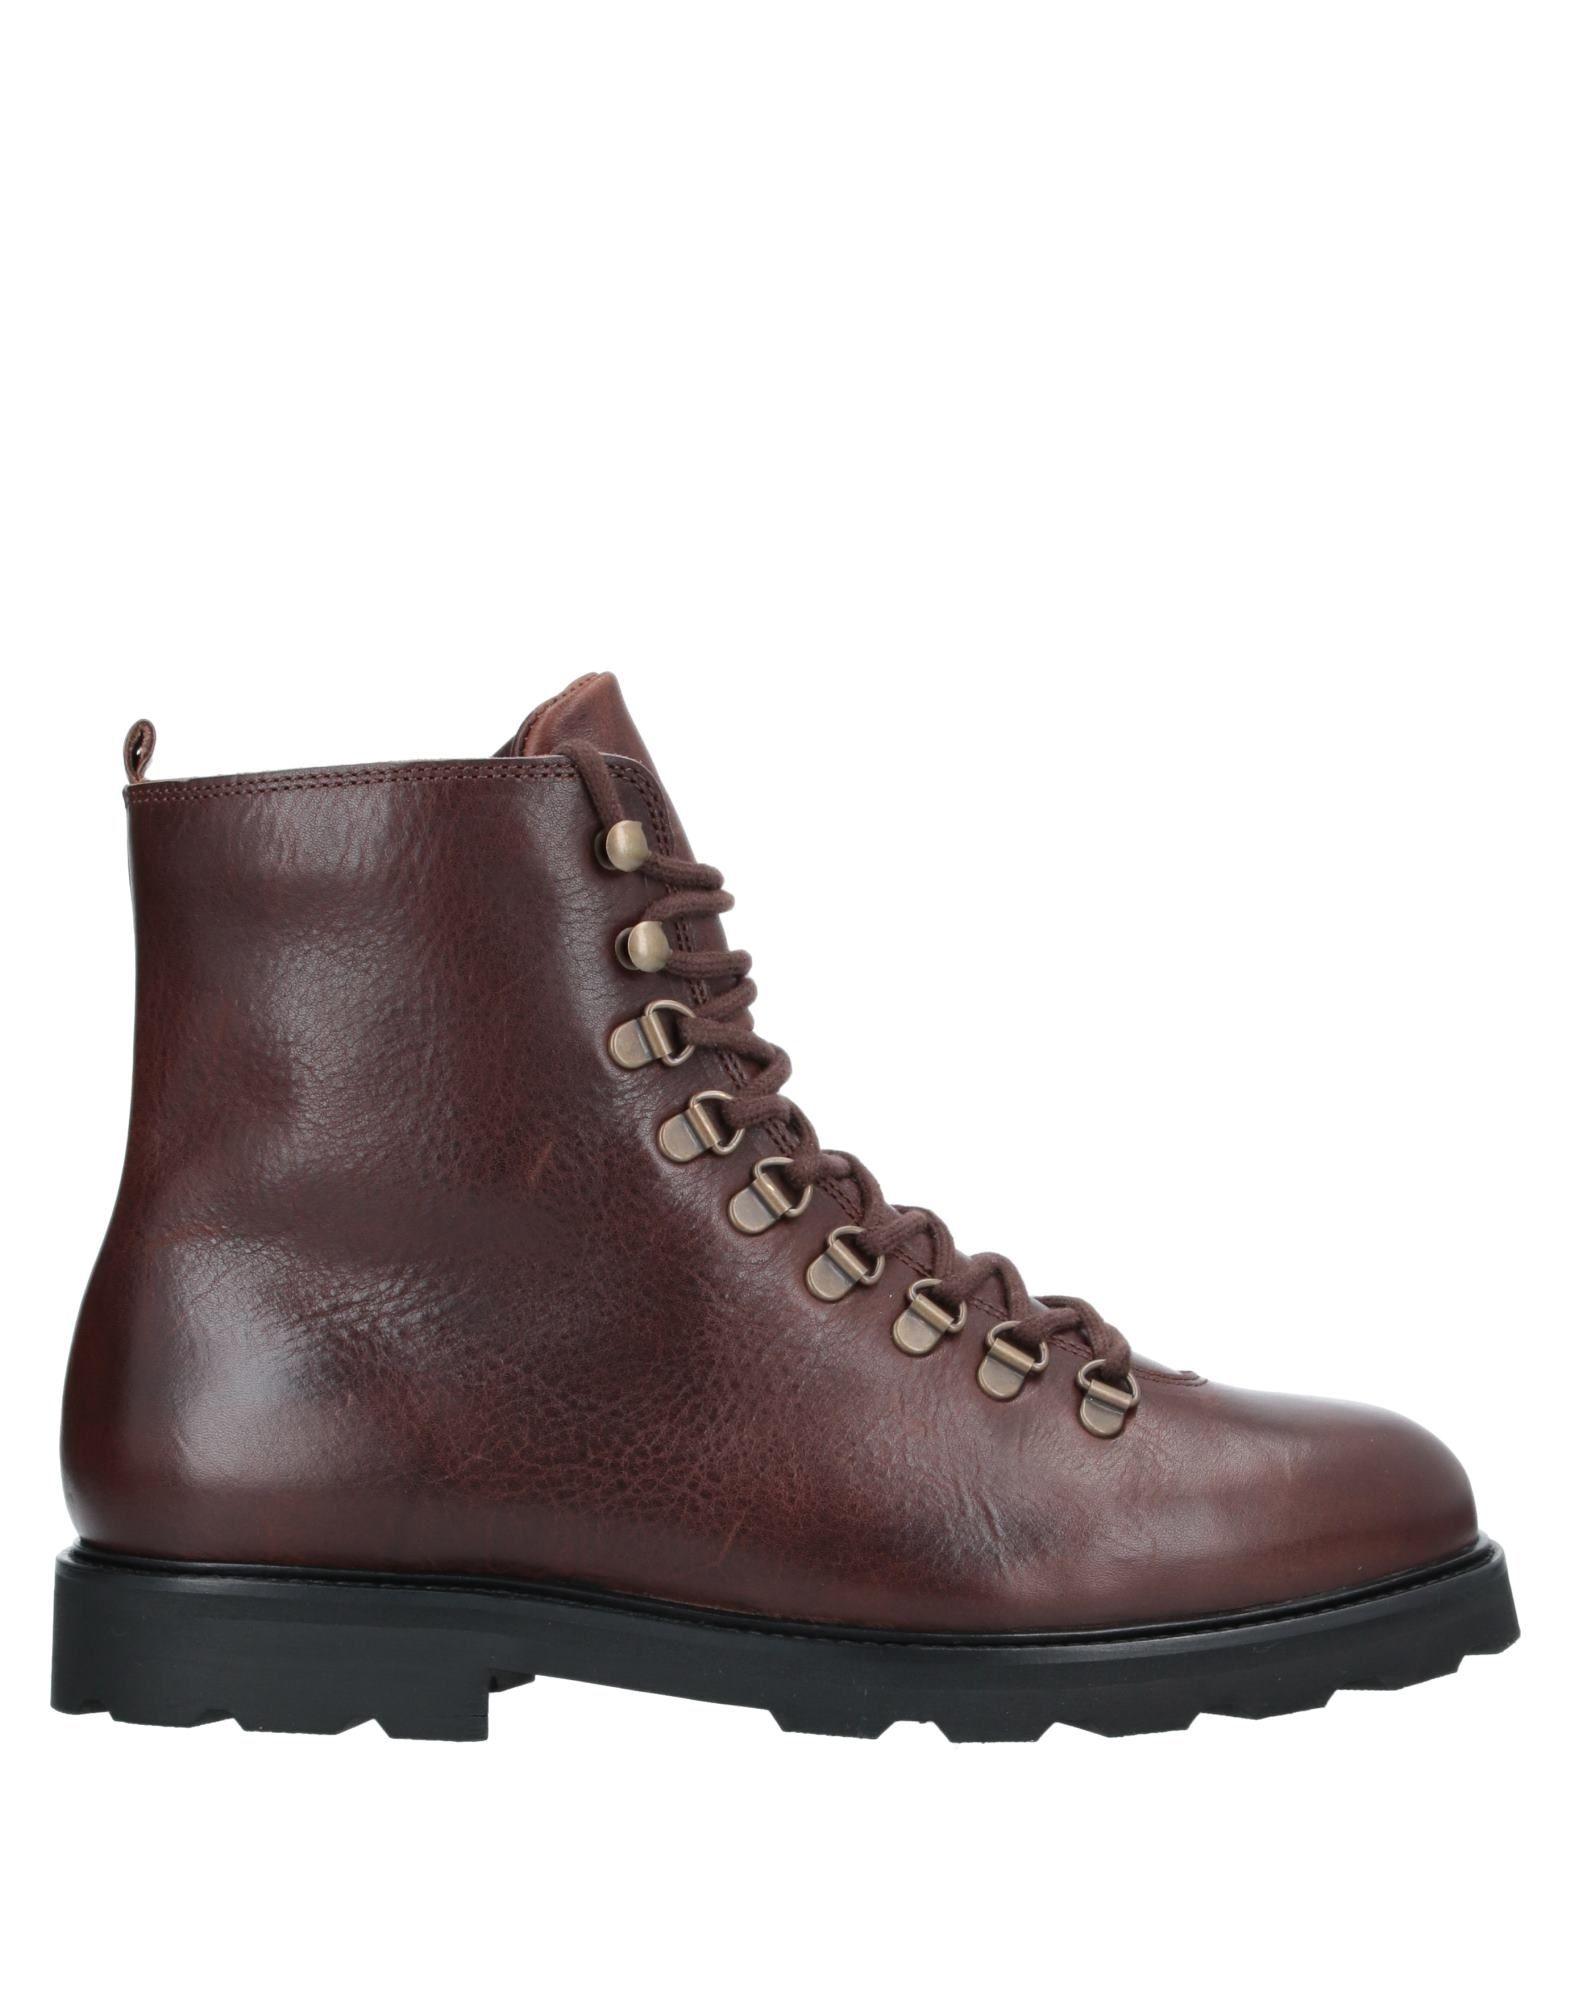 Royal Republiq Leather Ankle Boots in Brown for Men - Save 49% - Lyst